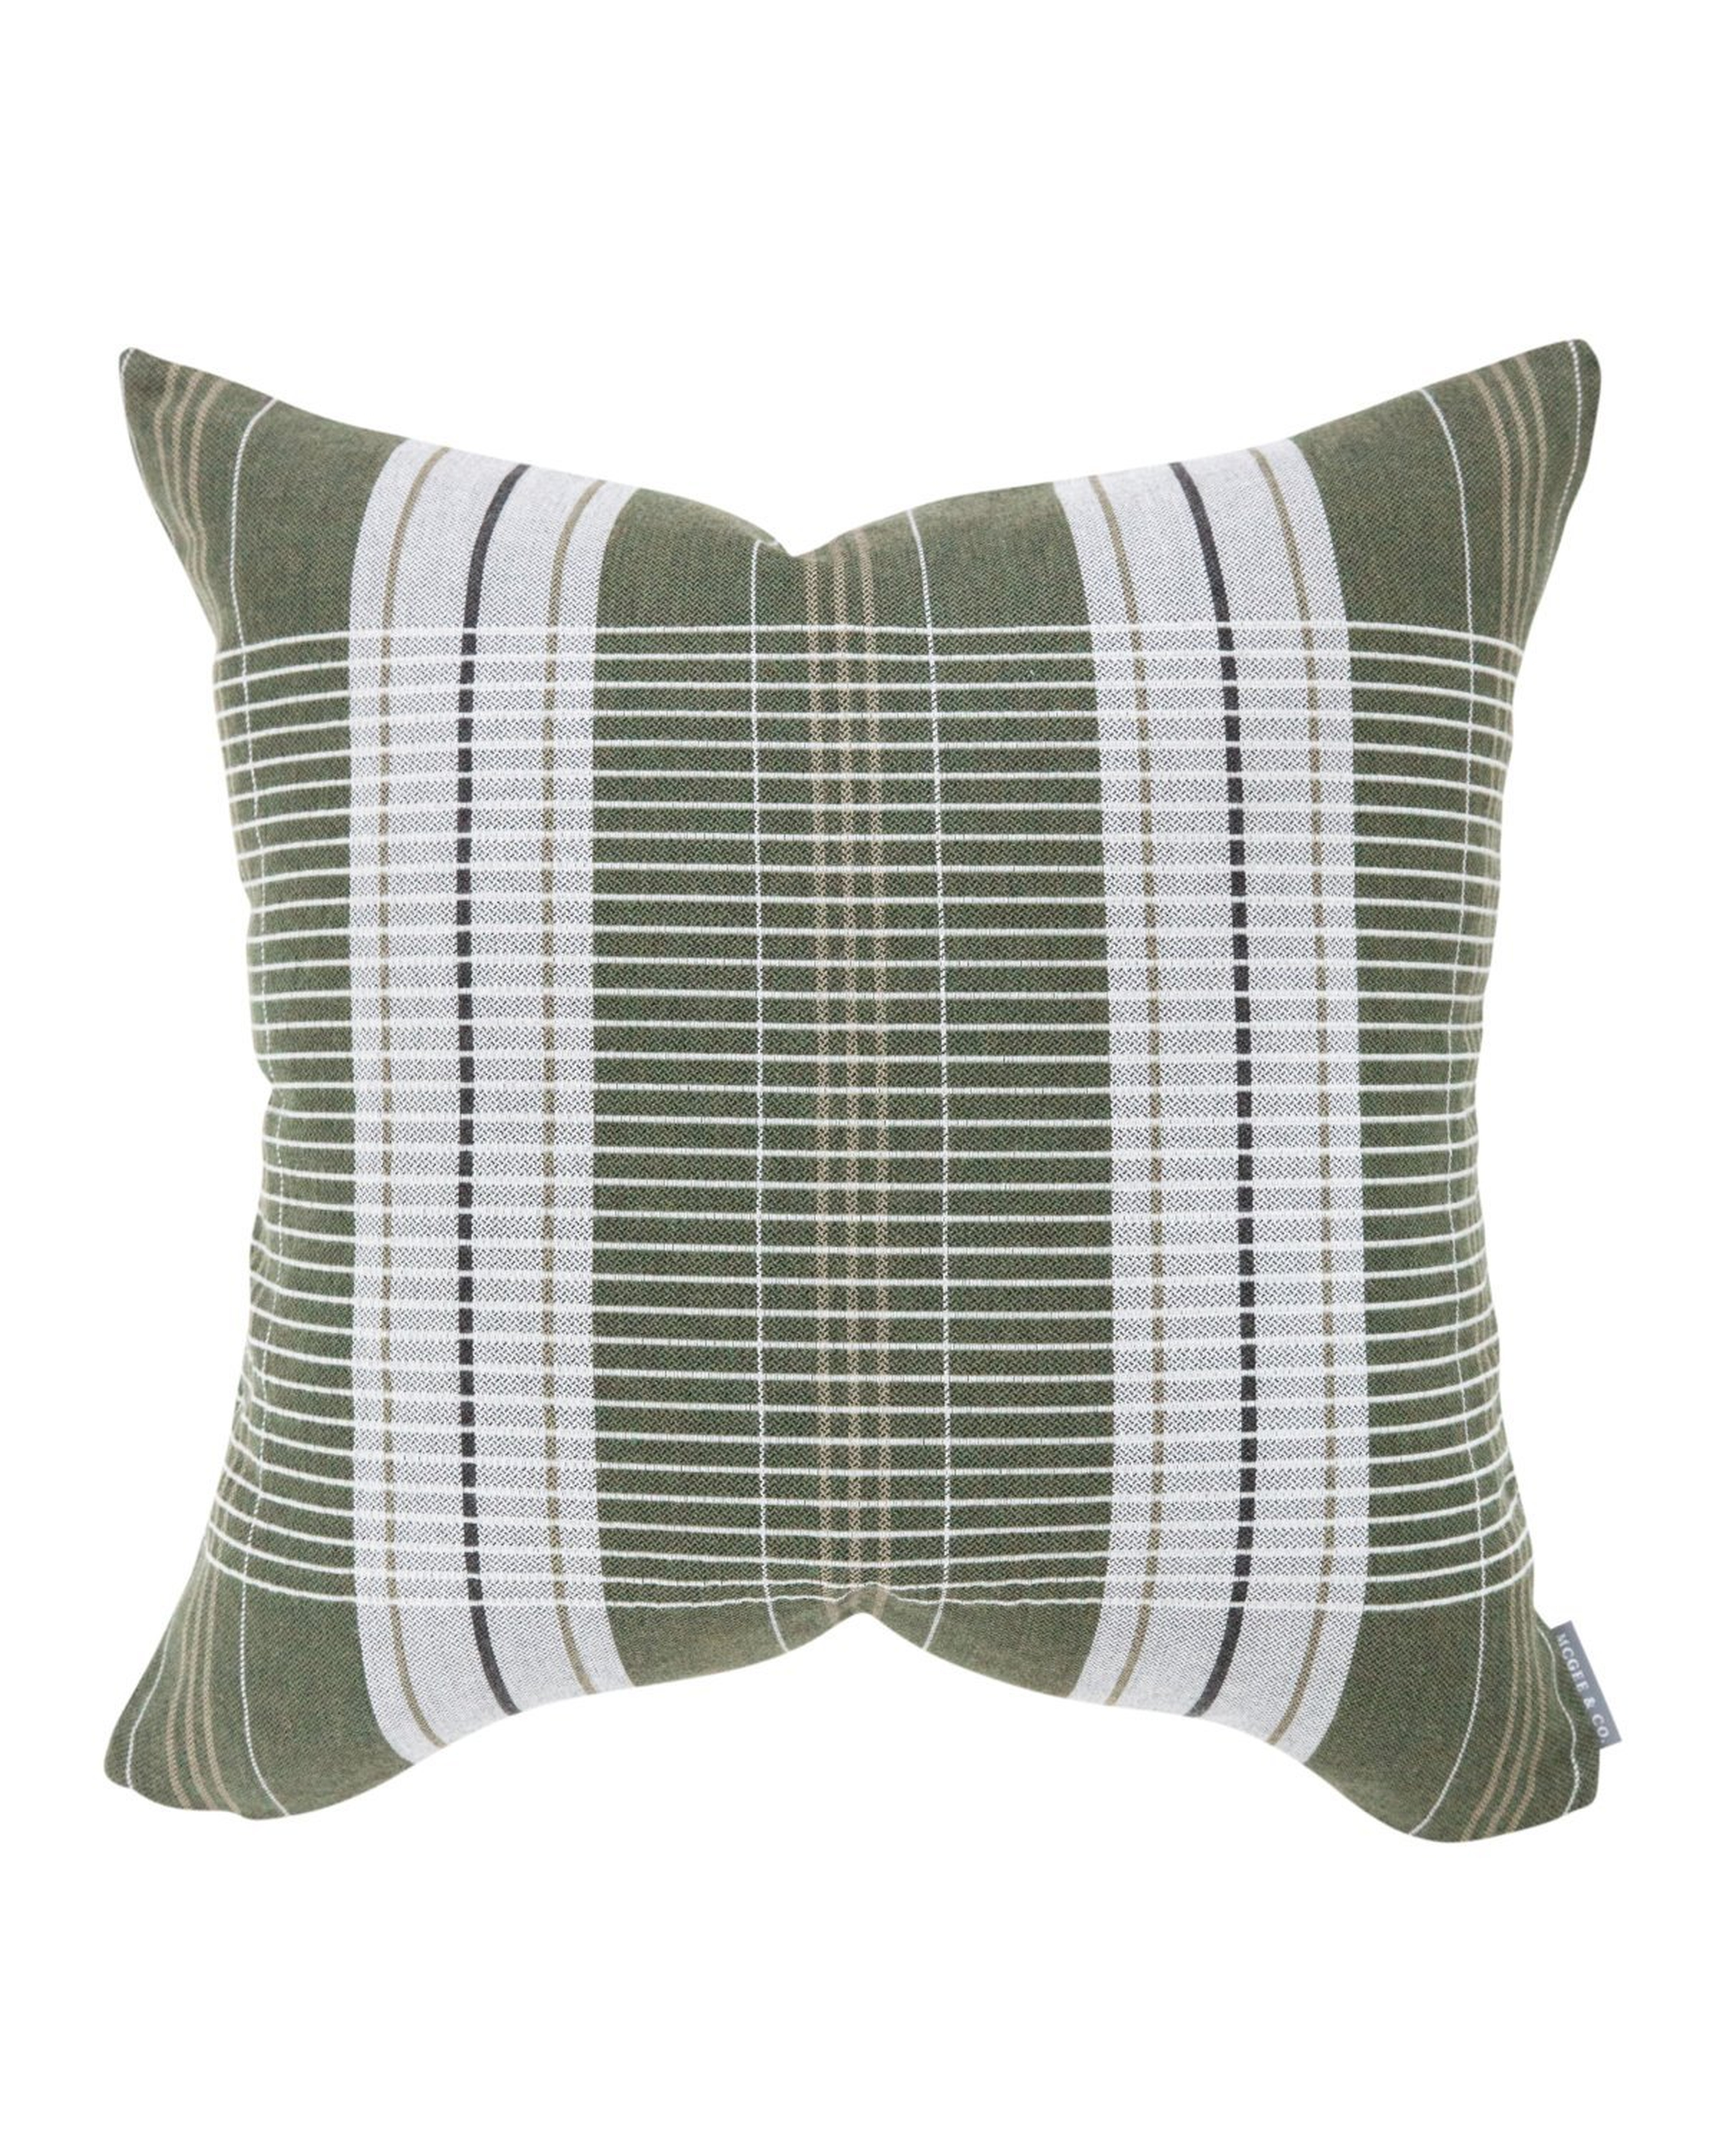 OXFORD WOVEN PLAID PILLOW WITHOUT INSERT, GREEN, 22" x 22" - McGee & Co.